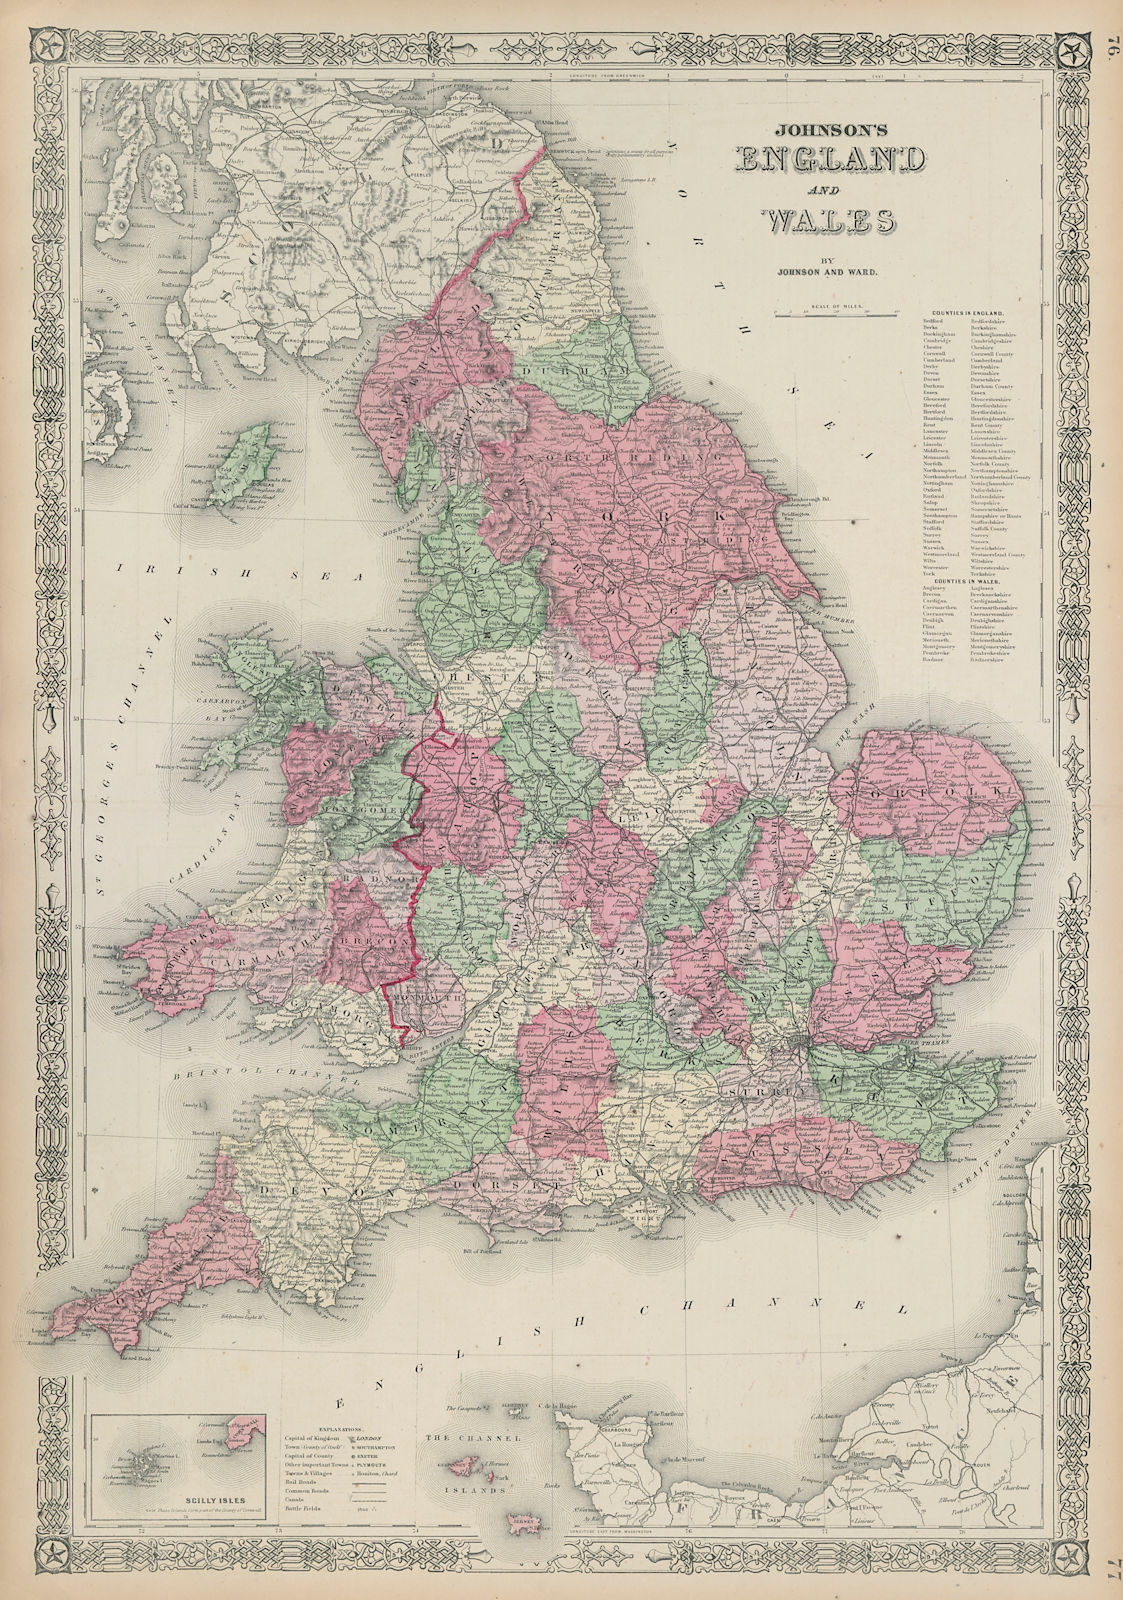 Associate Product Johnson's England and Wales in counties 1865 old antique map plan chart